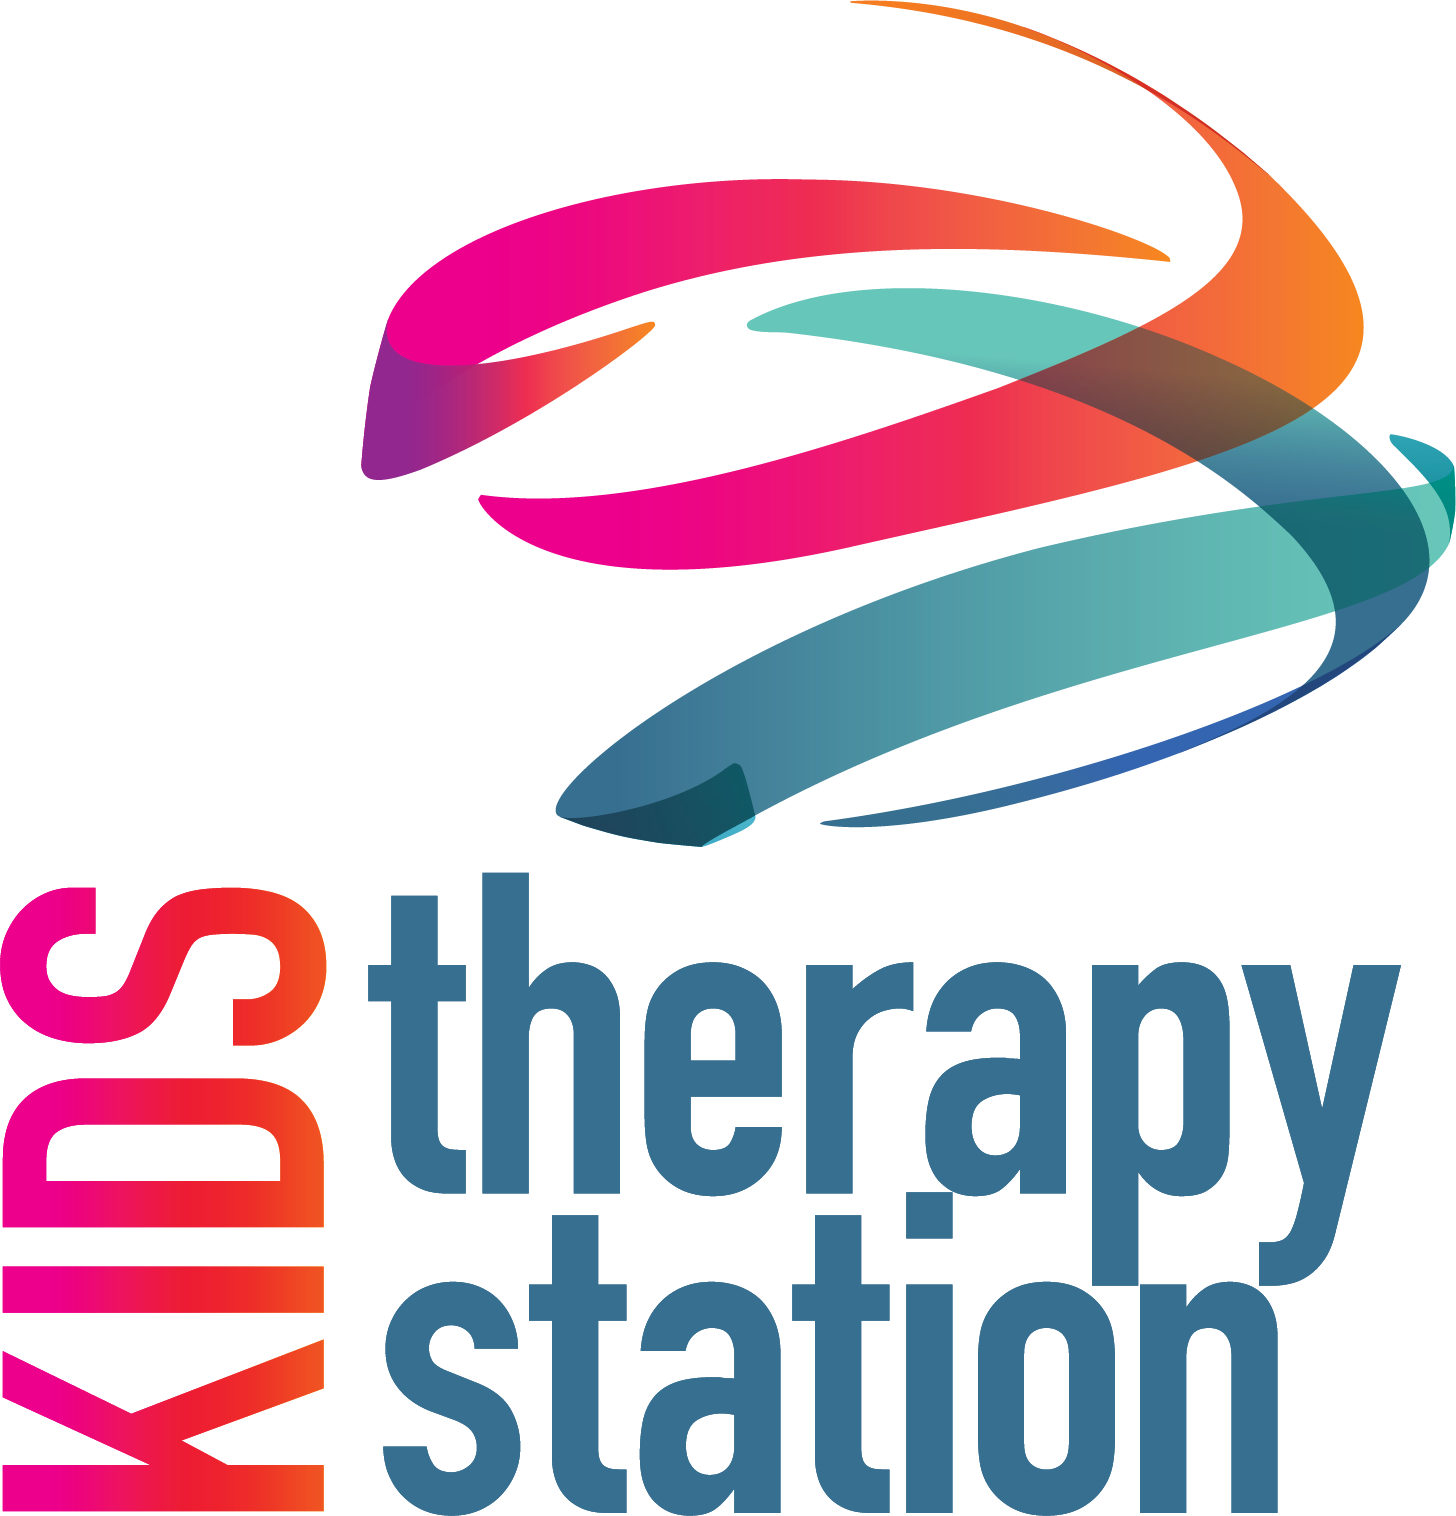 Kids Therapy Station